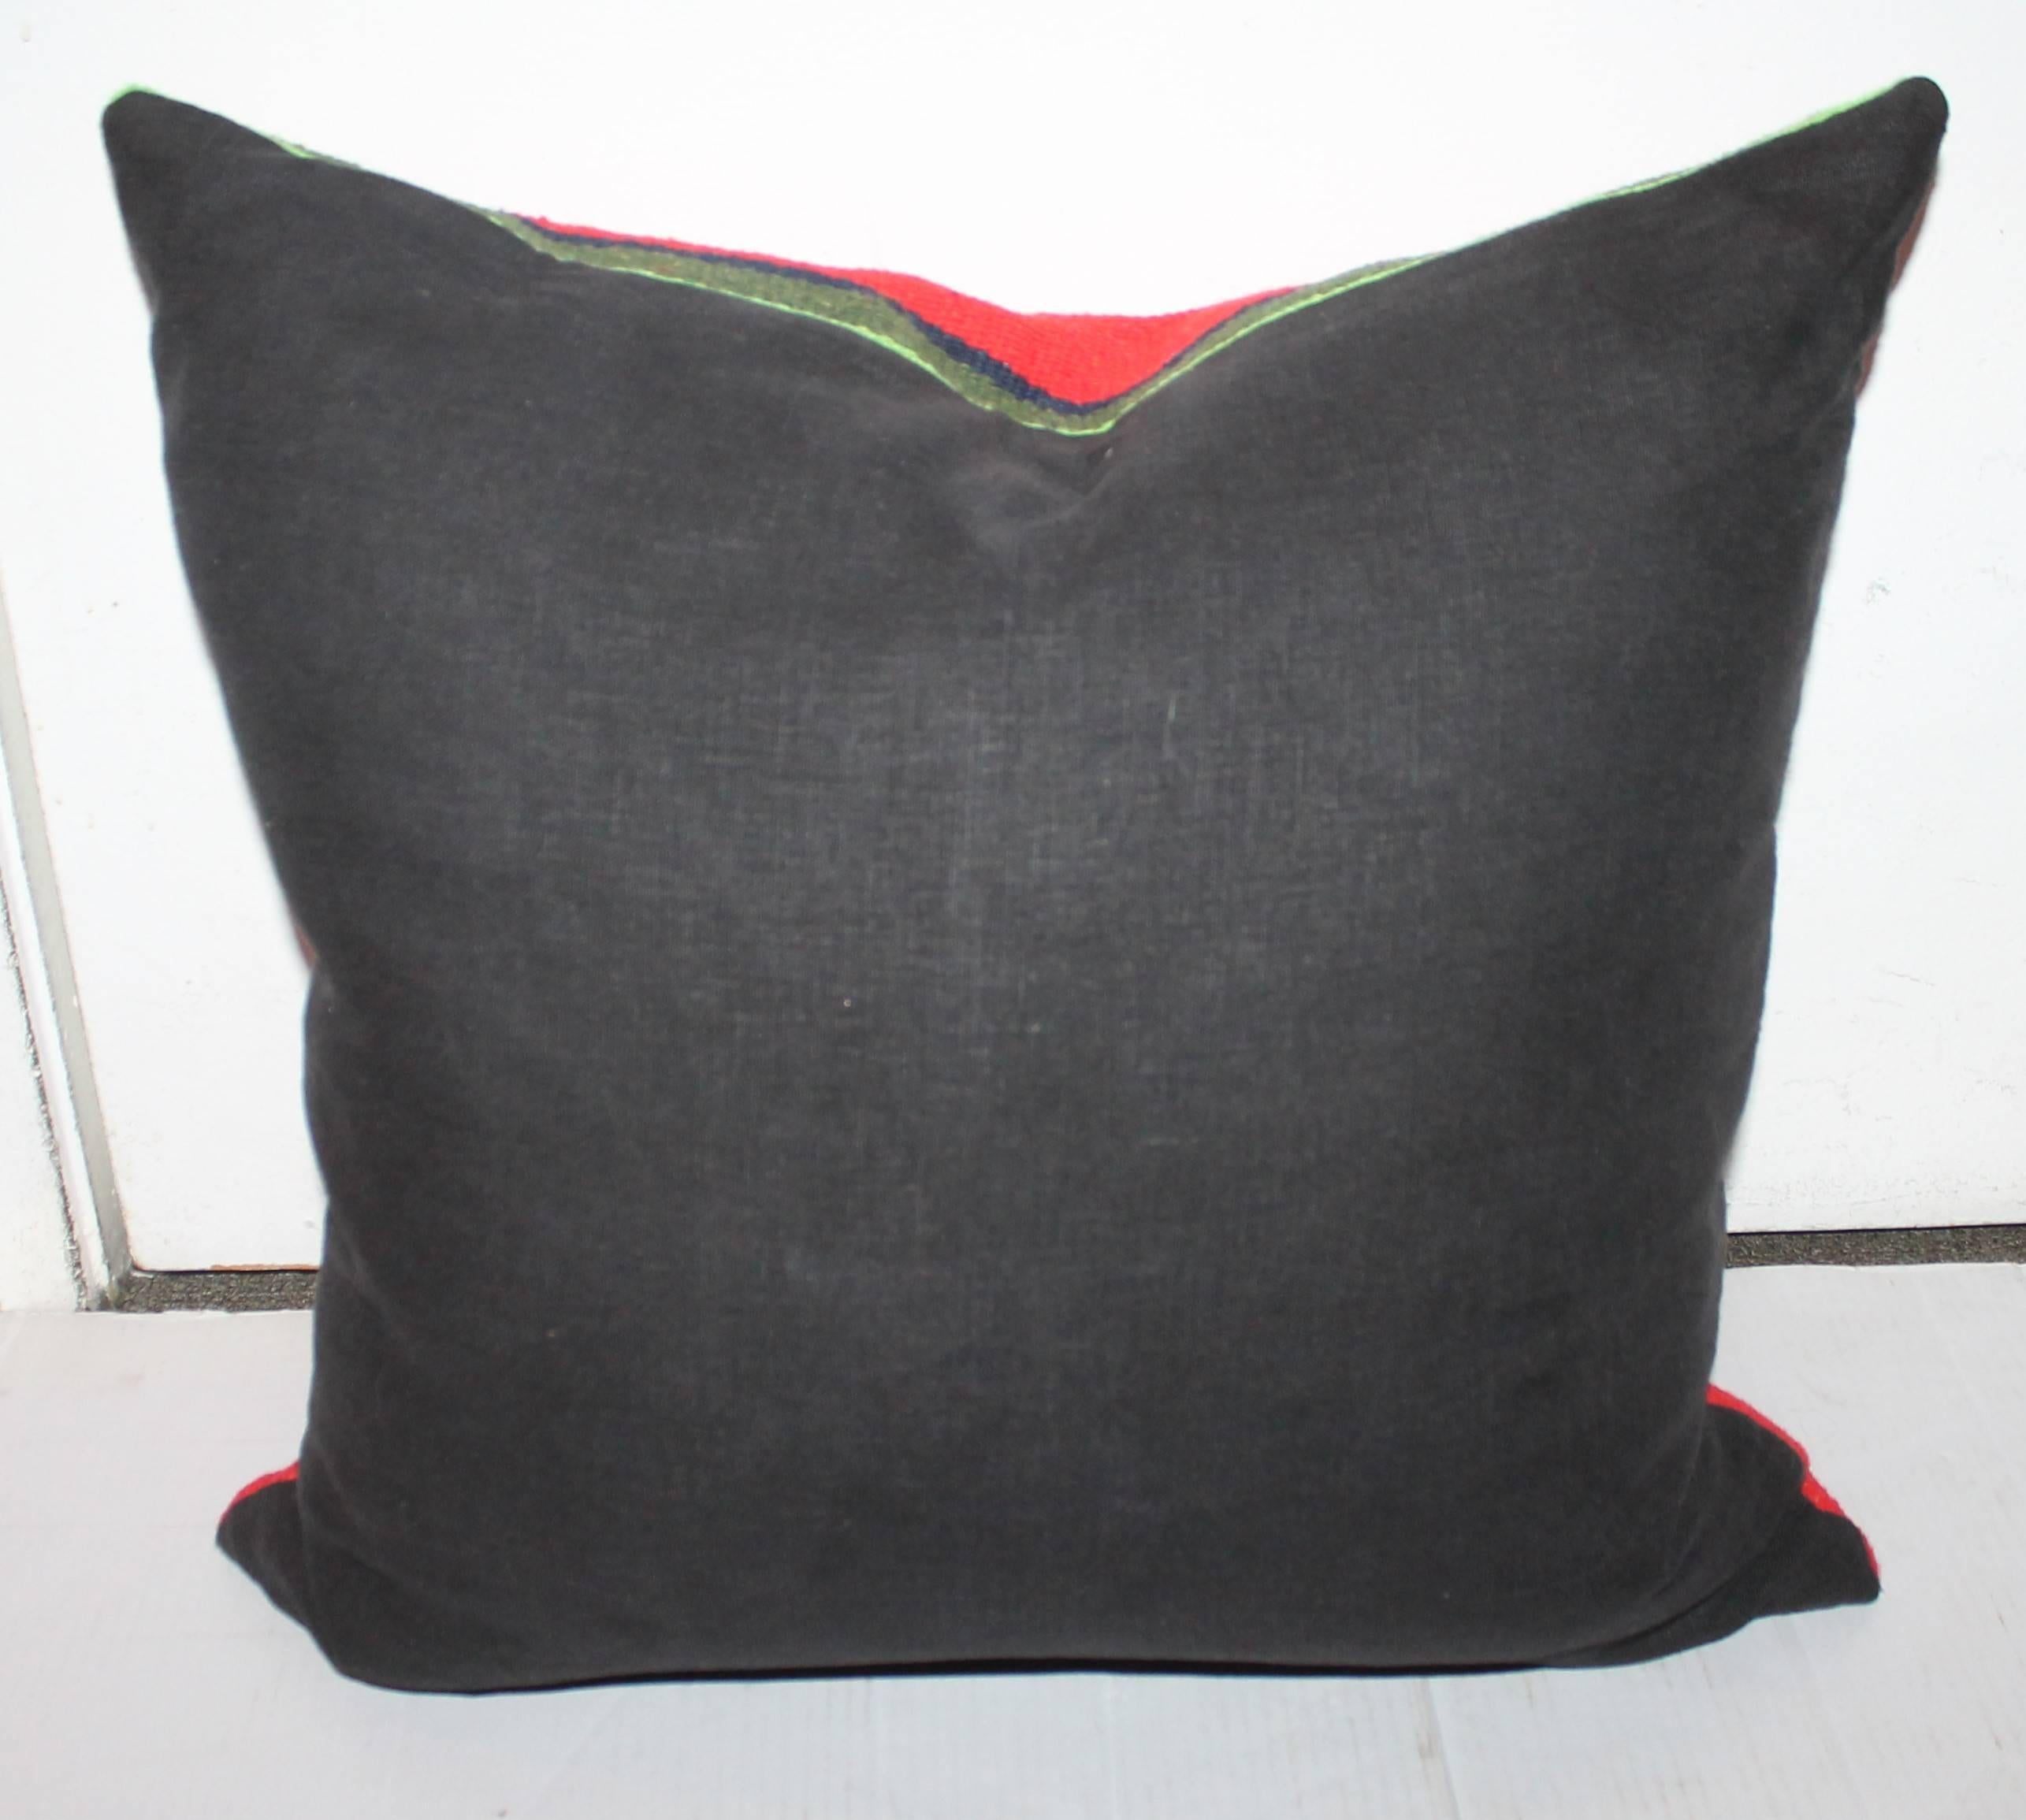 Hand-Woven Mexican and American Indian Weaving Donkey Pillow